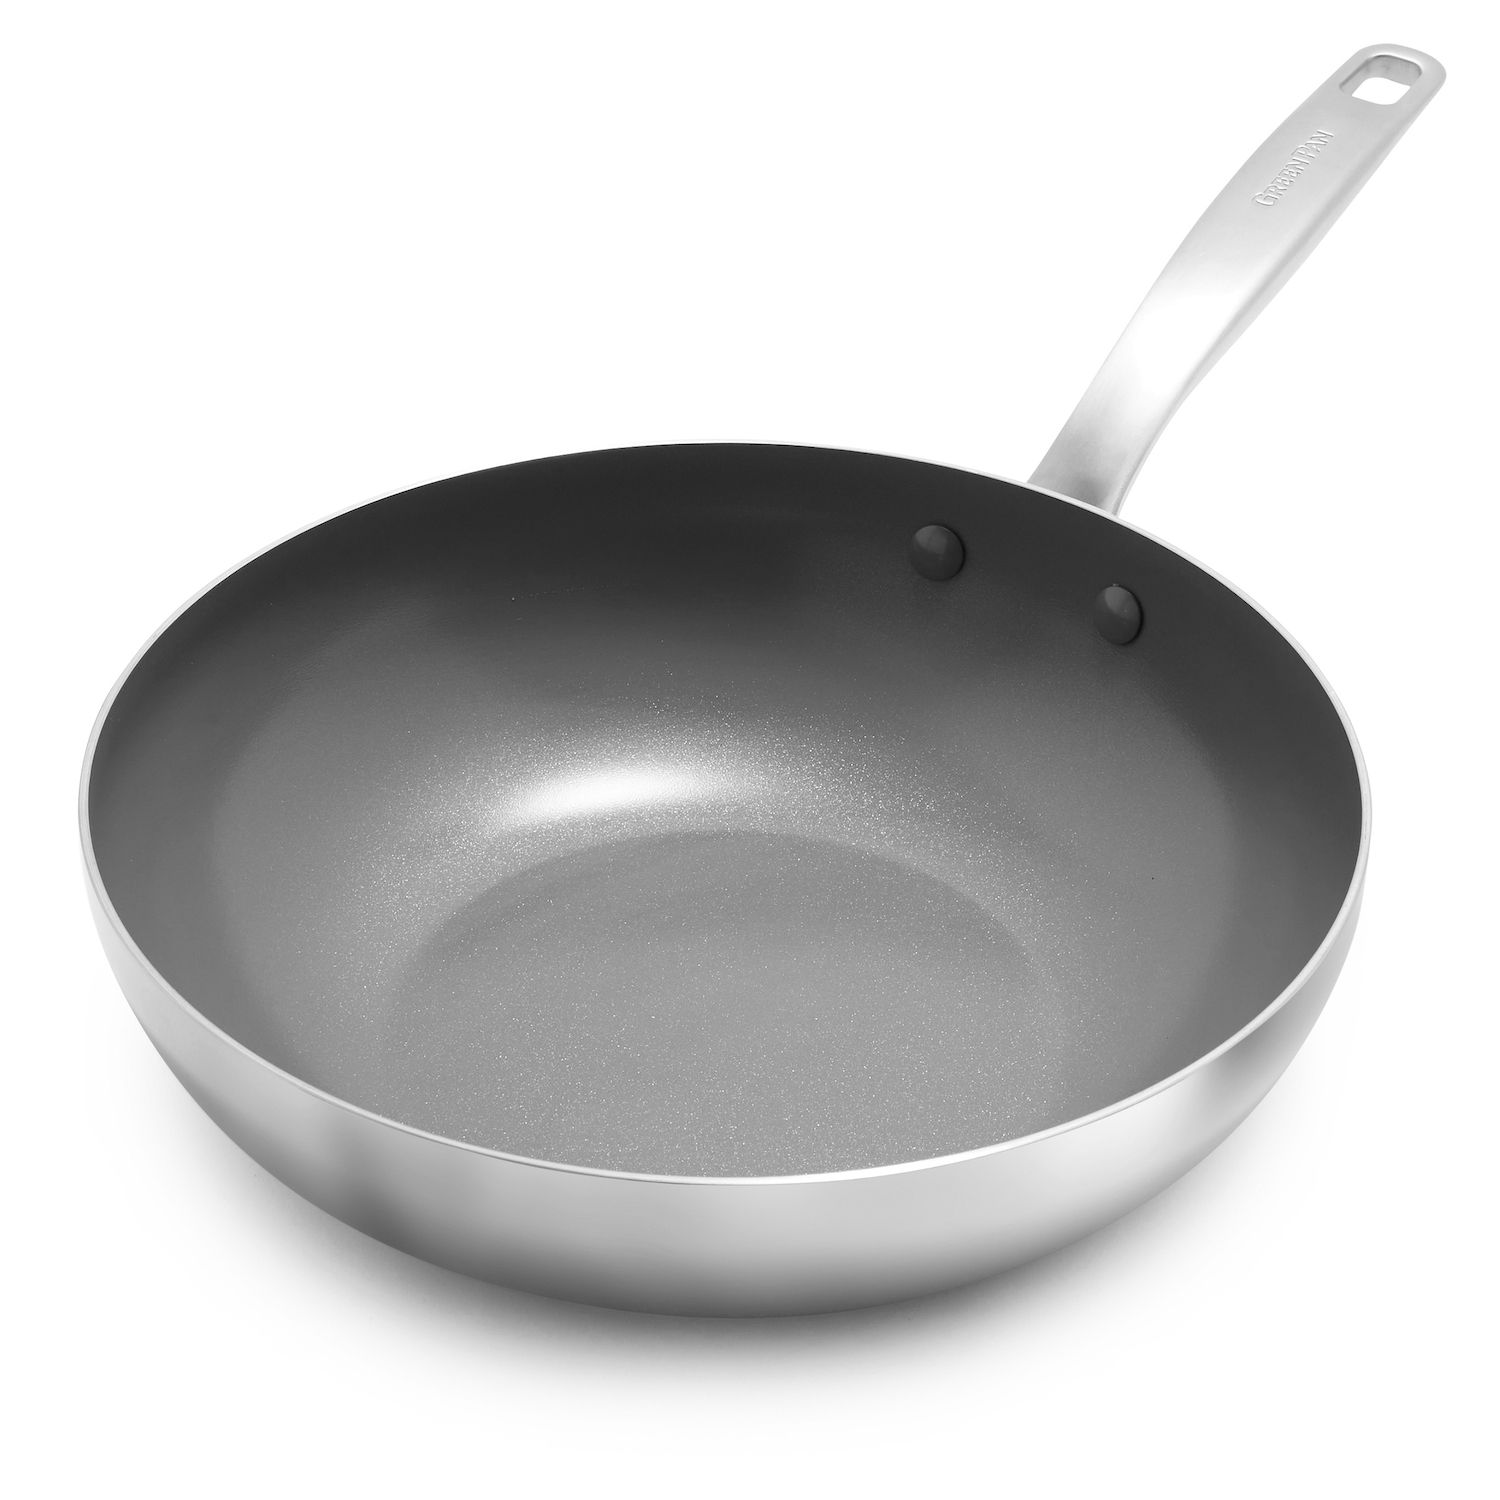 Lexi Home Stainless Steel Tri-Ply Non Stick Cookware - 5 Qt Wok Pan